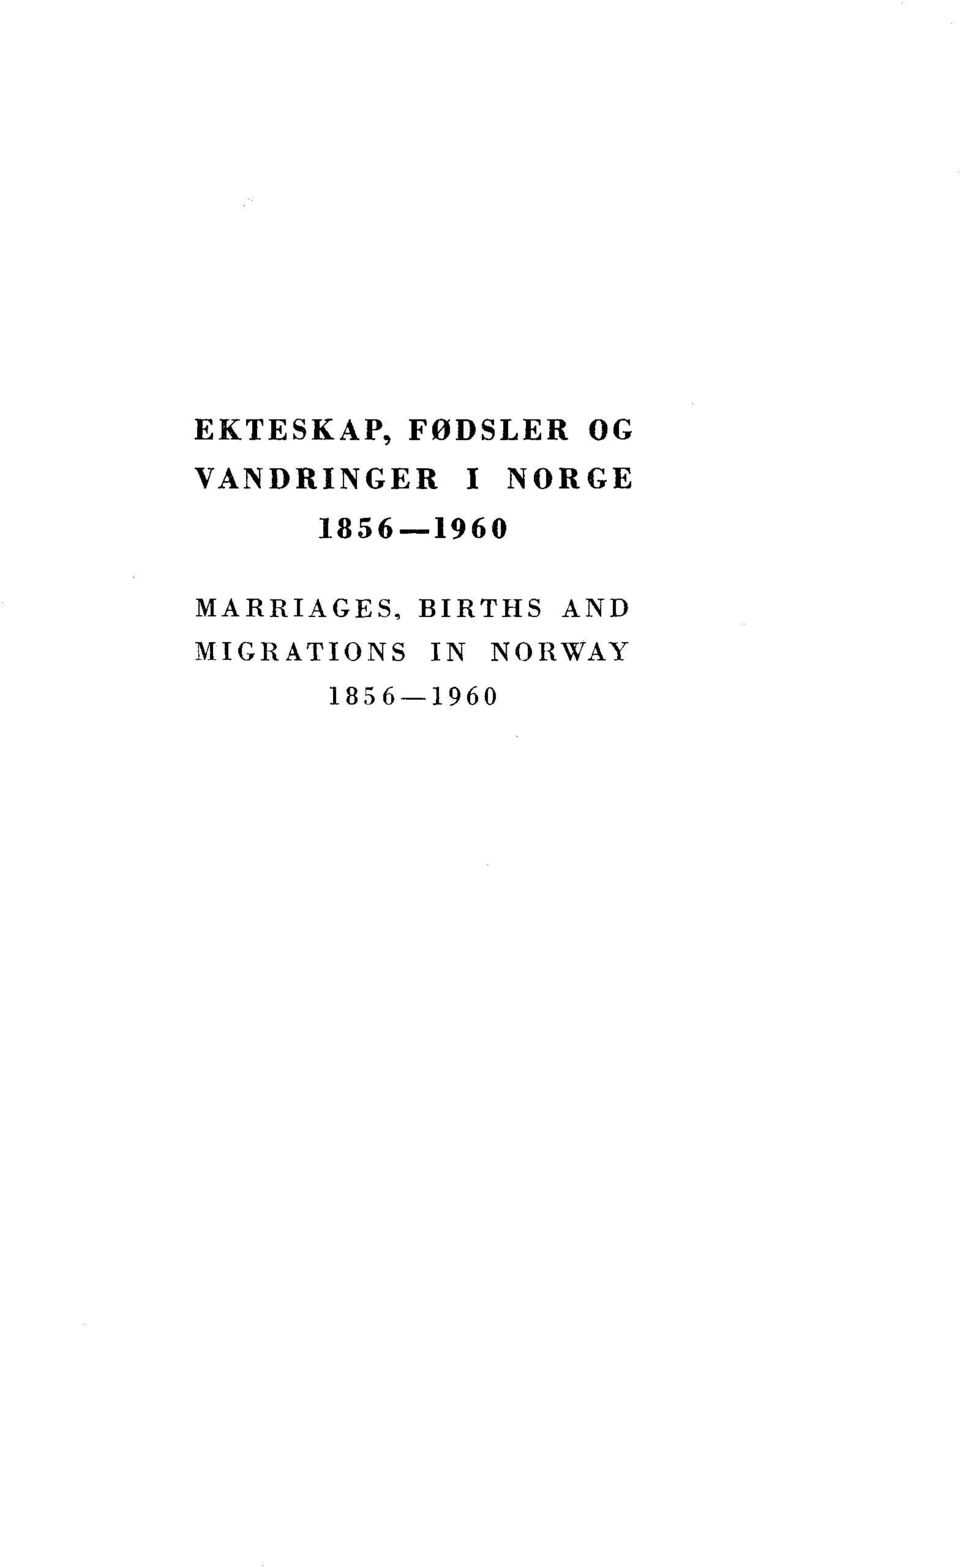 1960 MARRIAGES, BIRTHS